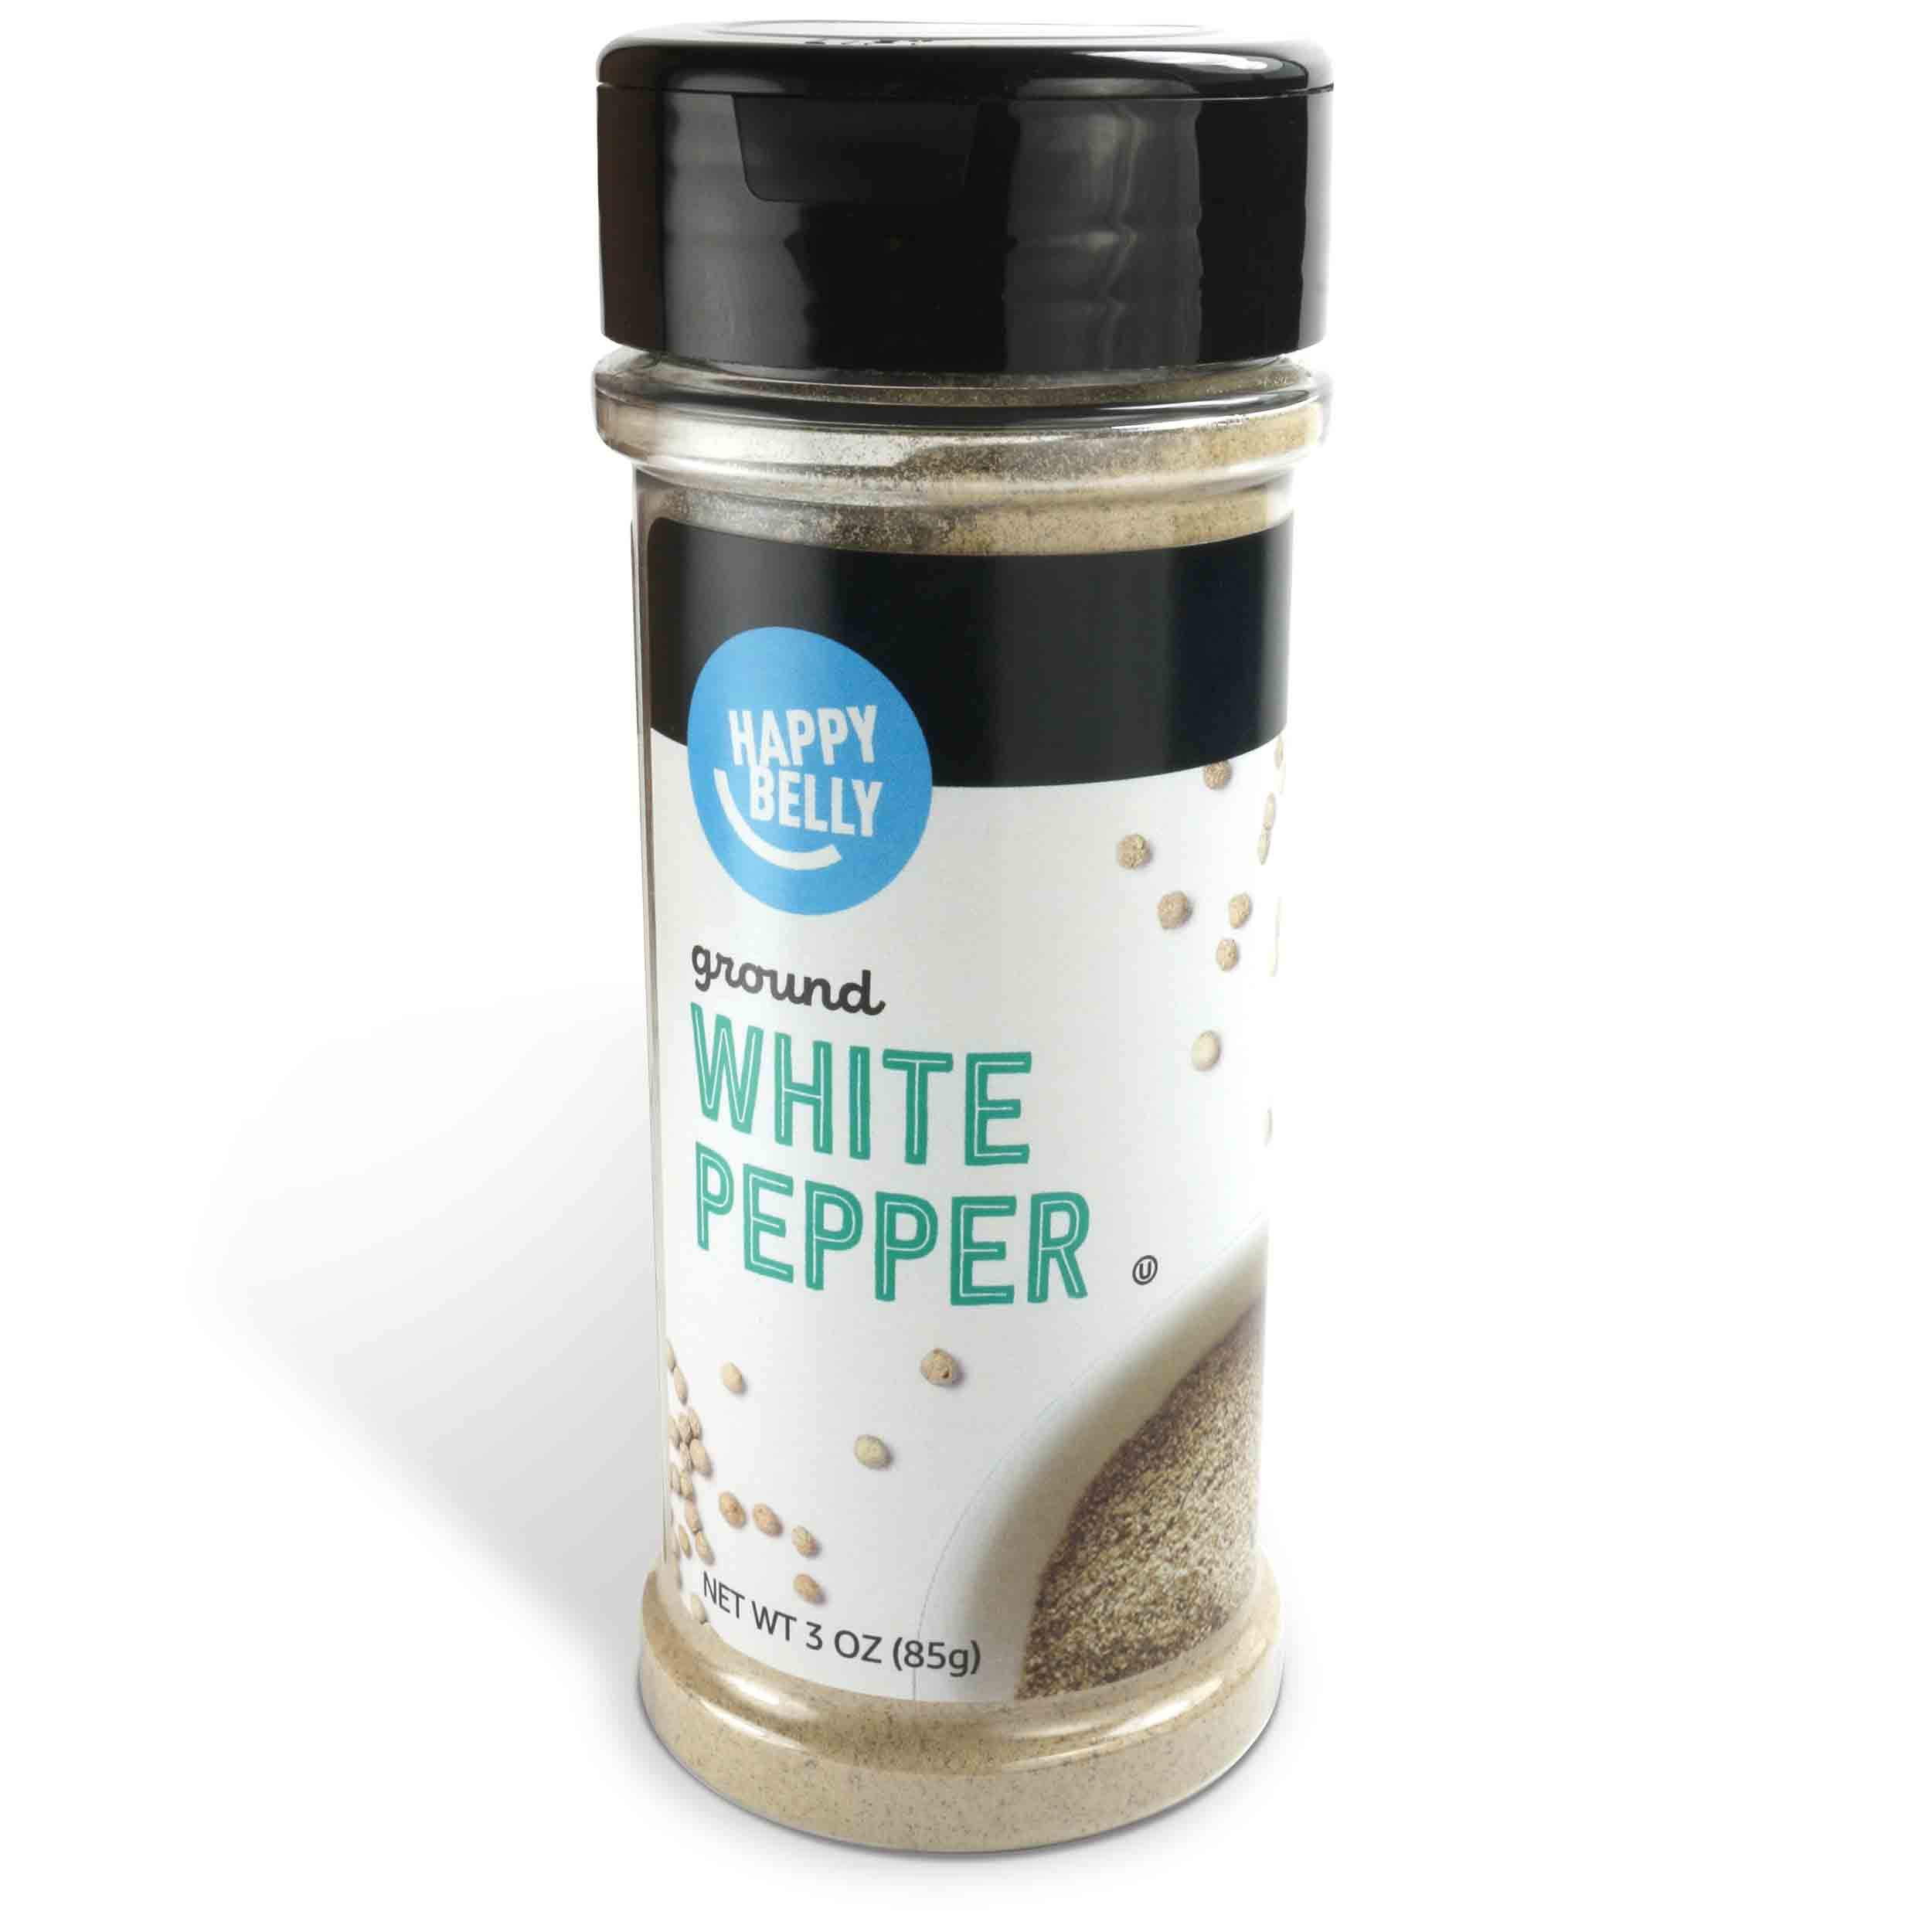 3-Oz. Amazon Brand Happy Belly Ground White Pepper $3.61 + Free Shipping w/ Prime or on $25+